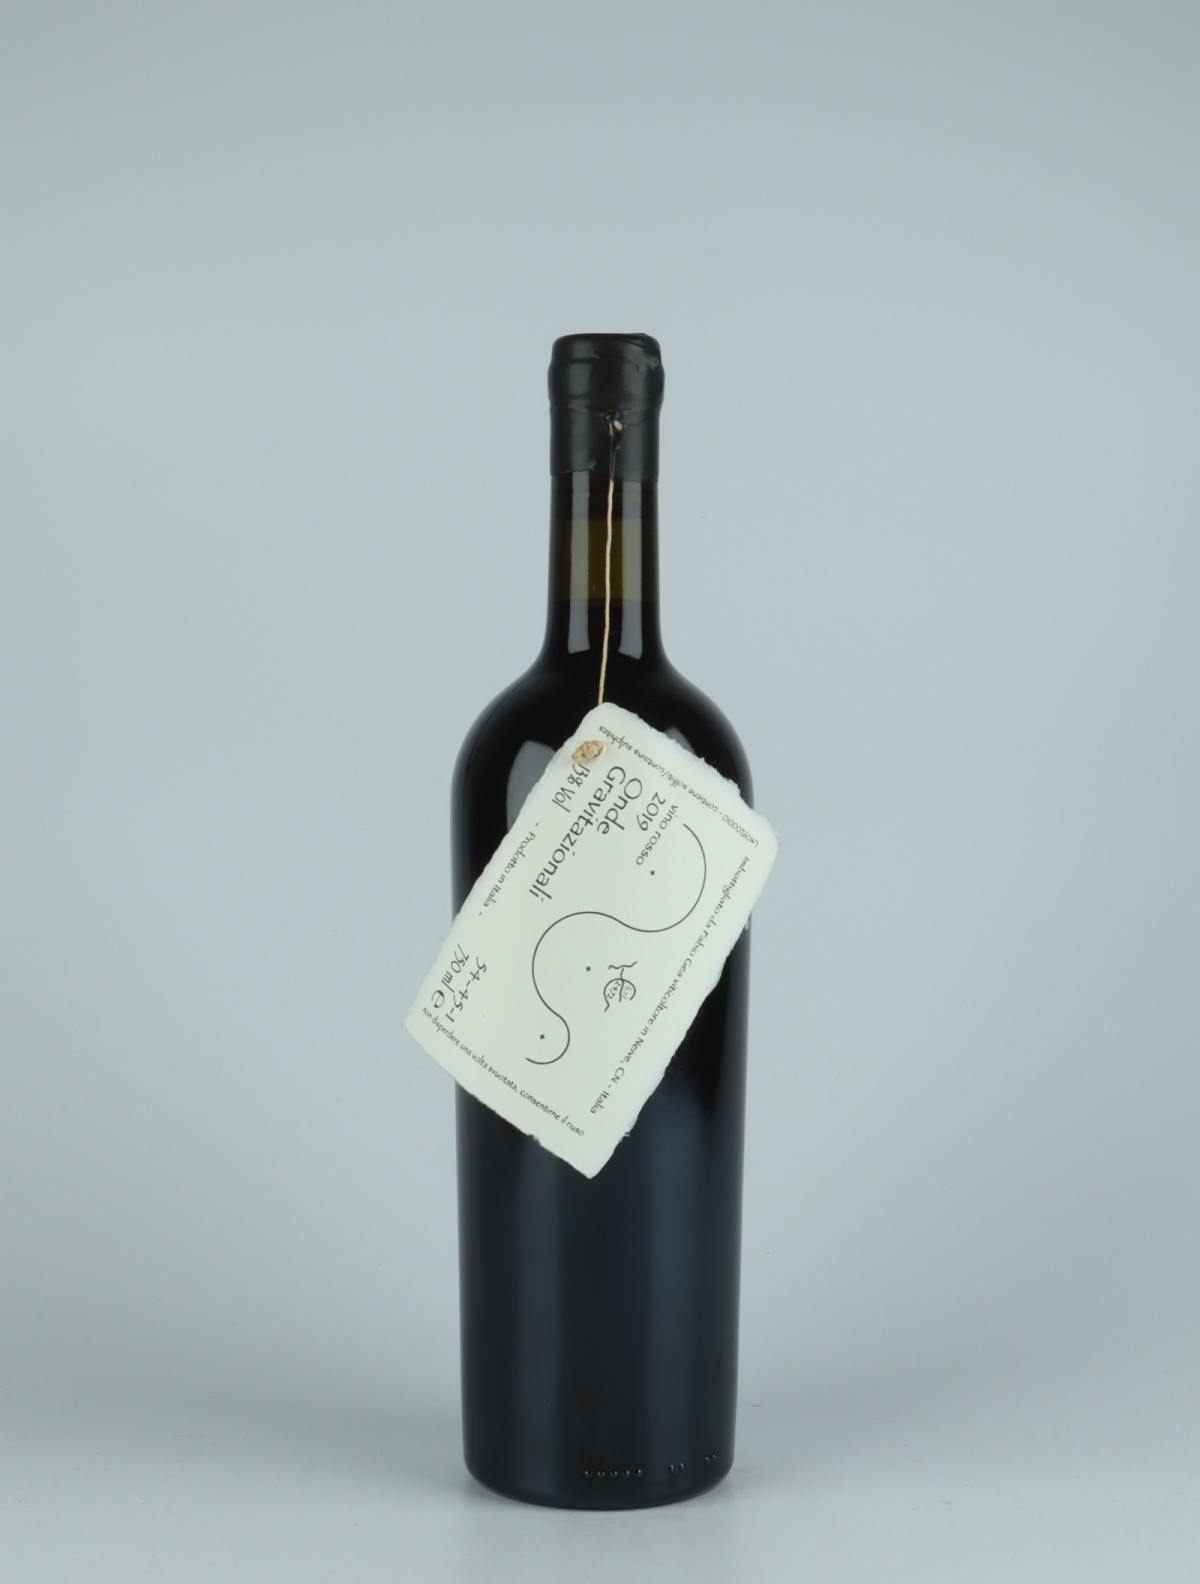 A bottle 2019 Onde Gravitazionali 54 45 1 Red wine from , Piedmont in Italy